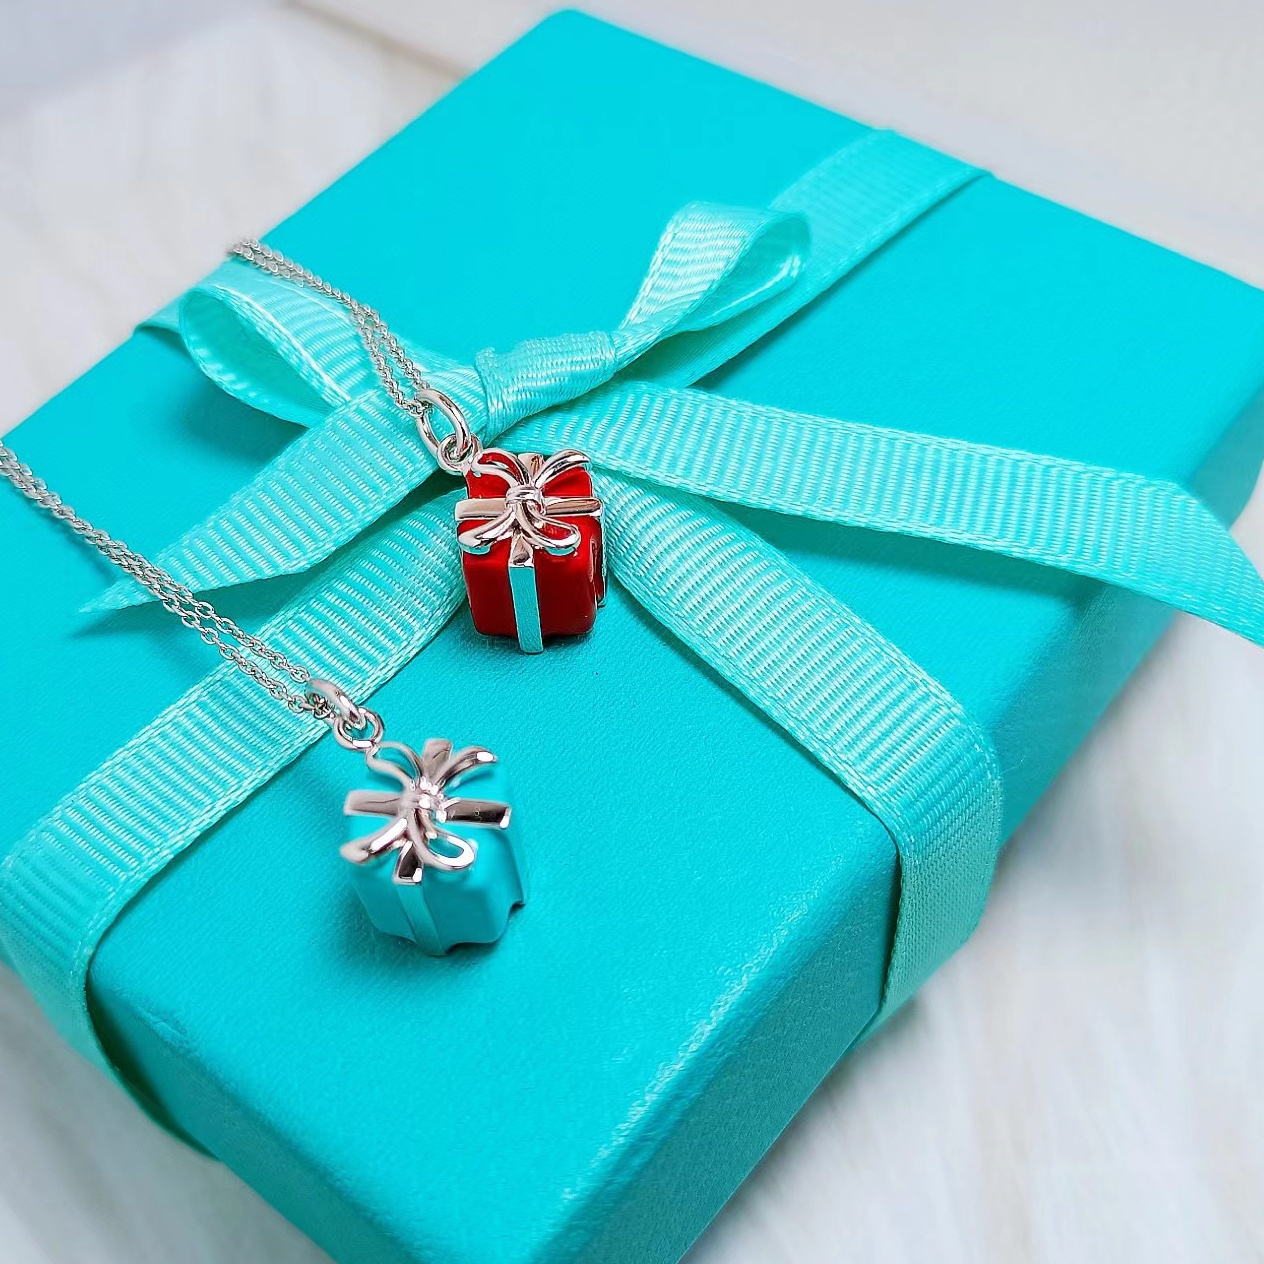 Luxury Gift box pendant necklace female stainless steel couple pendant designer neck jewelry Christmas gift Valentine's Day w304d